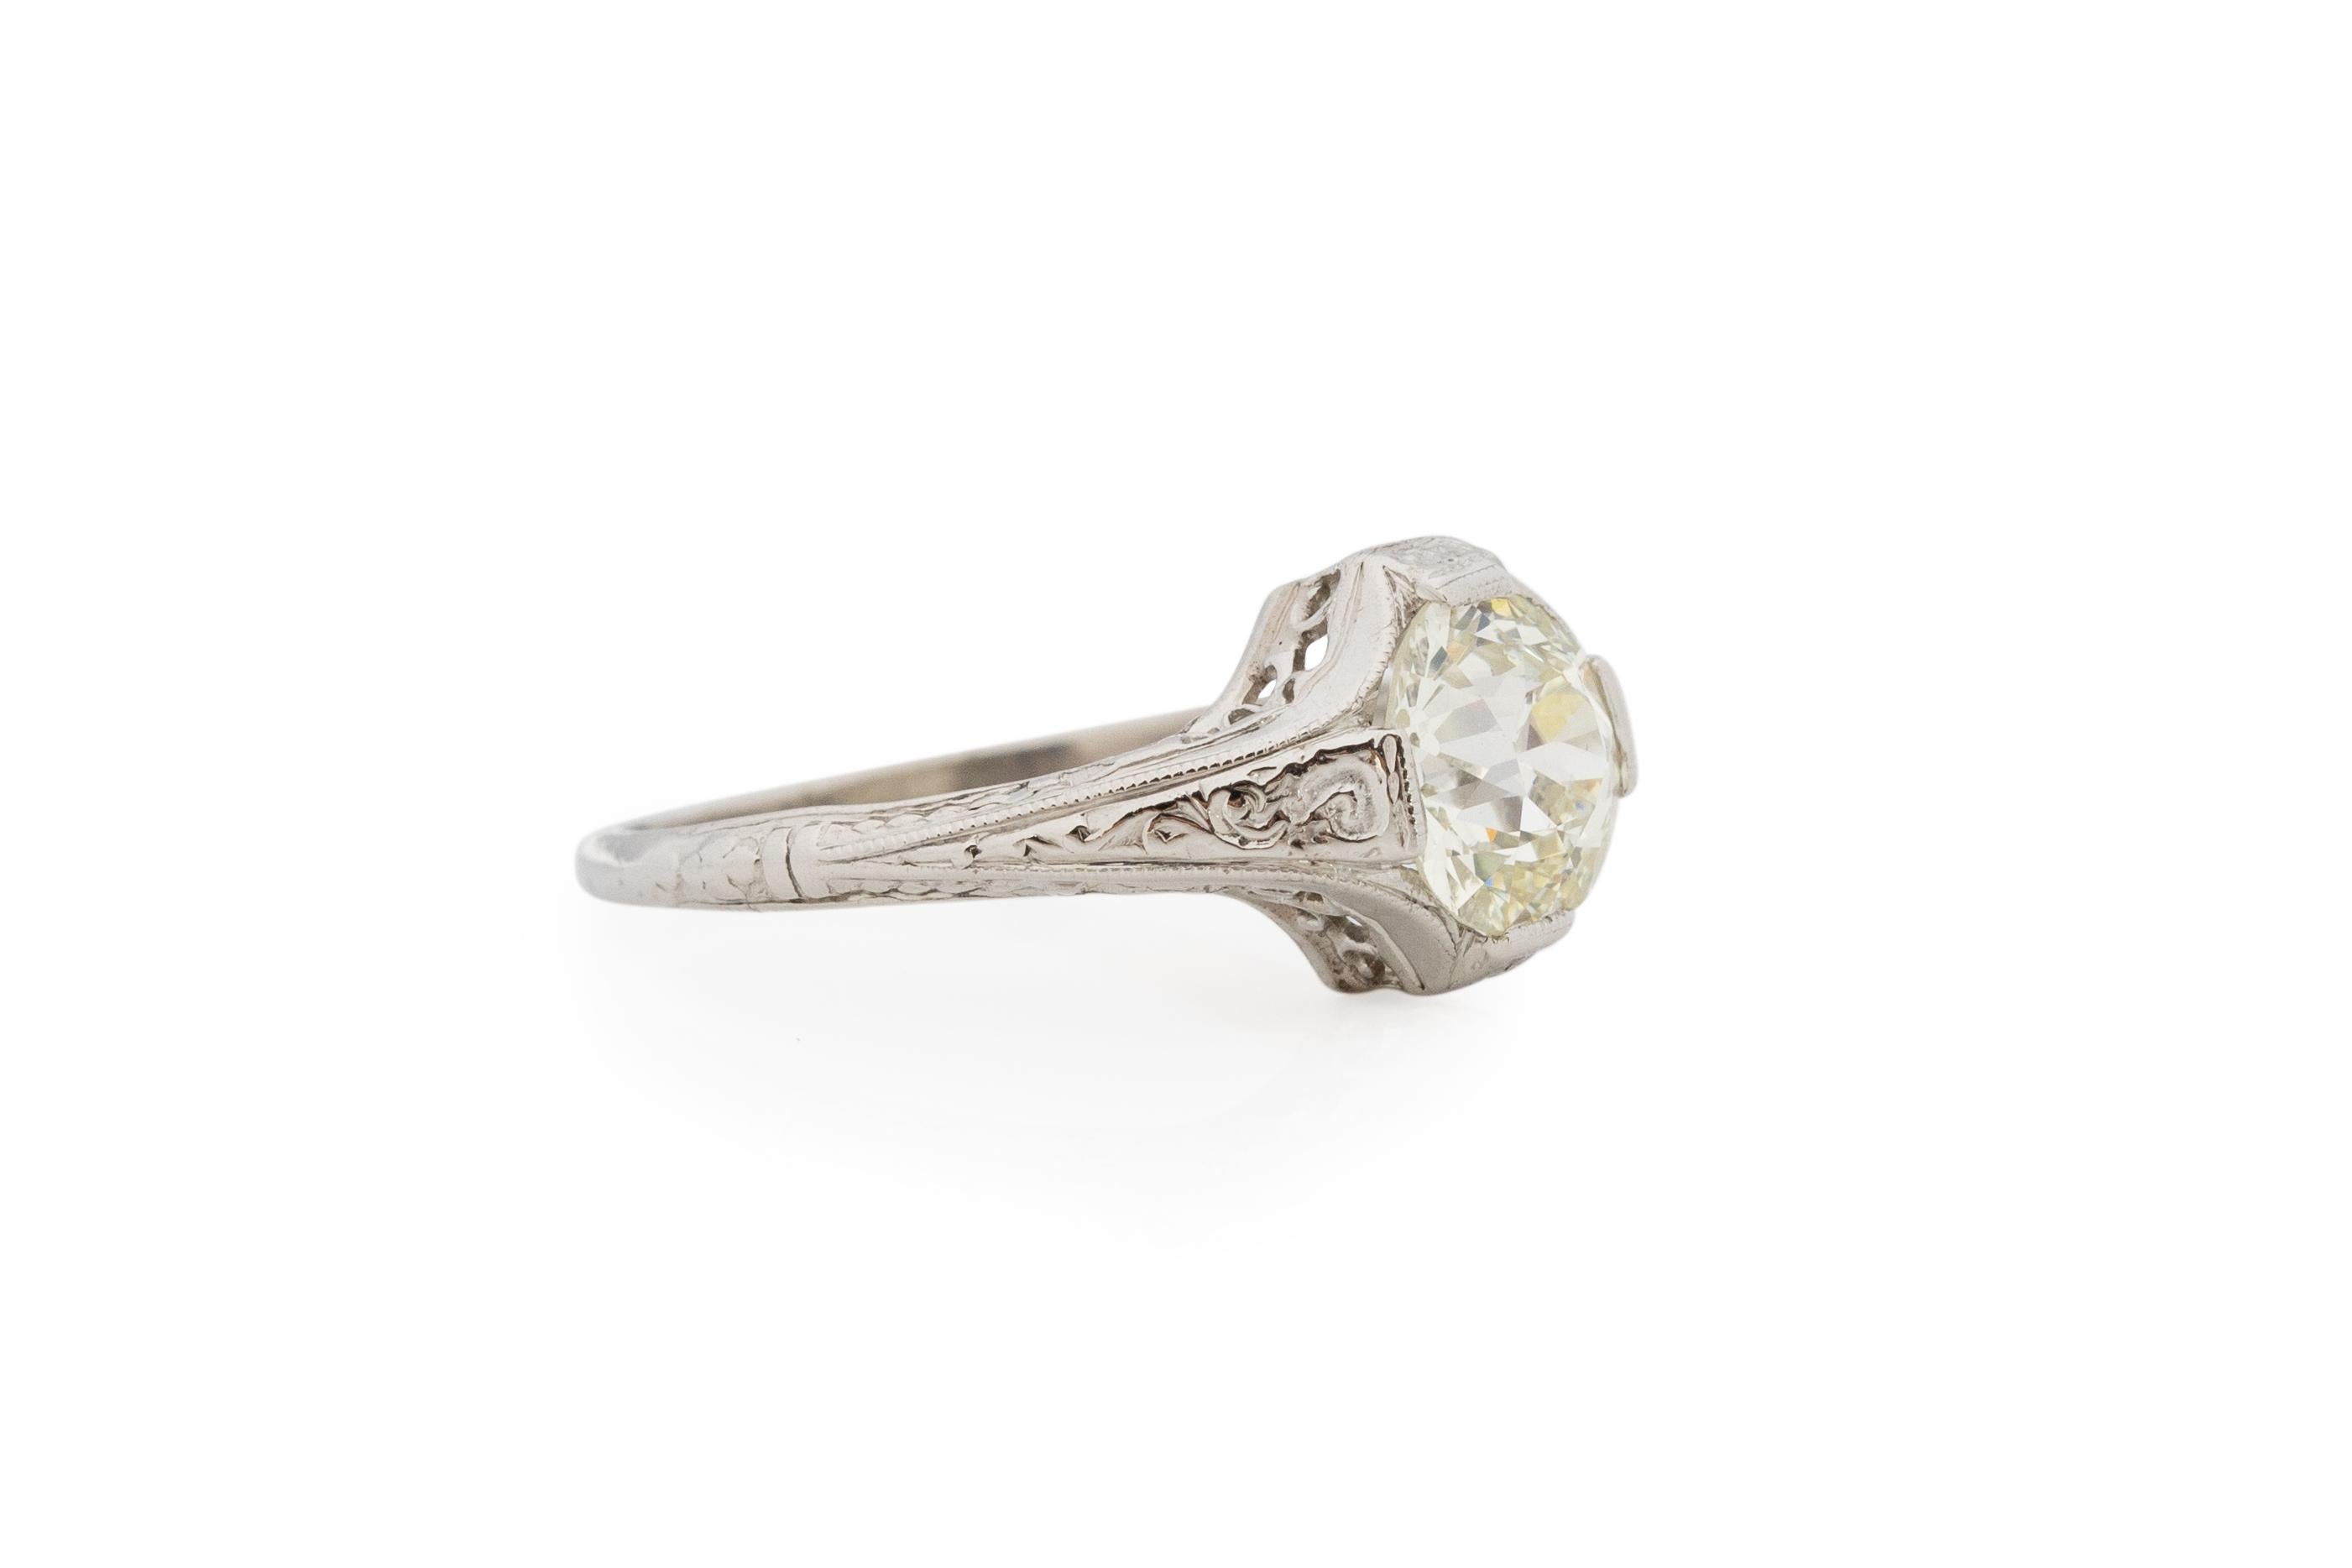 Ring Size: 6.5
Metal Type: Platinum [Hallmarked, and Tested]
Weight: 2.6 grams

Center Diamond Details:
Weight: 1.45 carat
Cut: Old European brilliant
Color: O/P Light Yellow
Clarity: VS2

Finger to Top of Stone Measurement: 5.5mm
Condition: